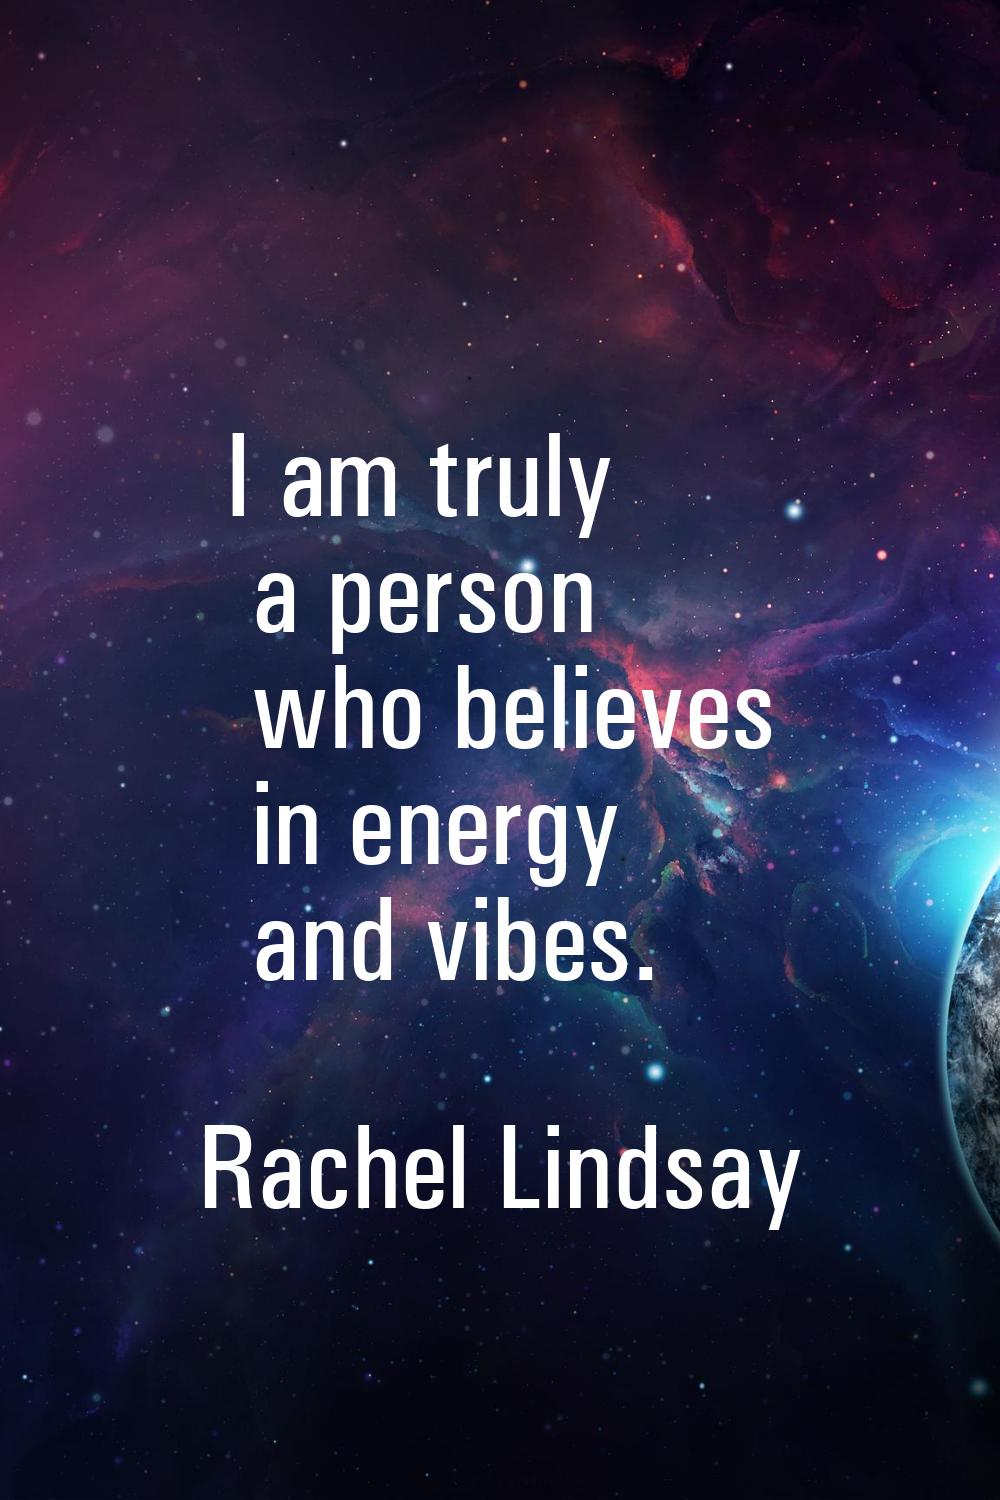 I am truly a person who believes in energy and vibes.